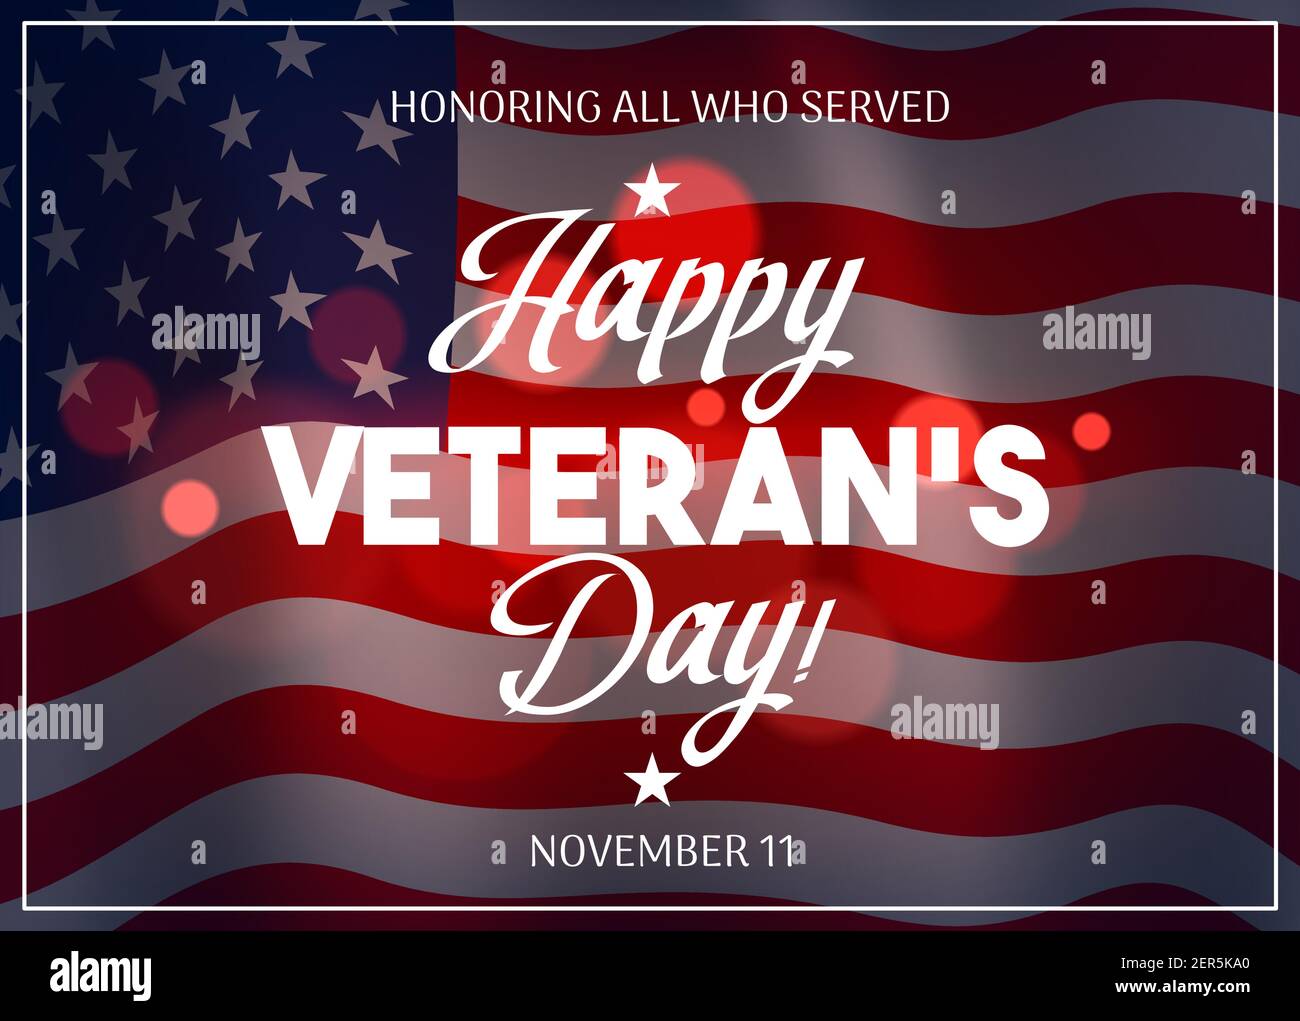 Veteran Day vector design with flag of USA on background. American military veterans and soldiers of United States Armed Forces memorial or honoring p Stock Vector